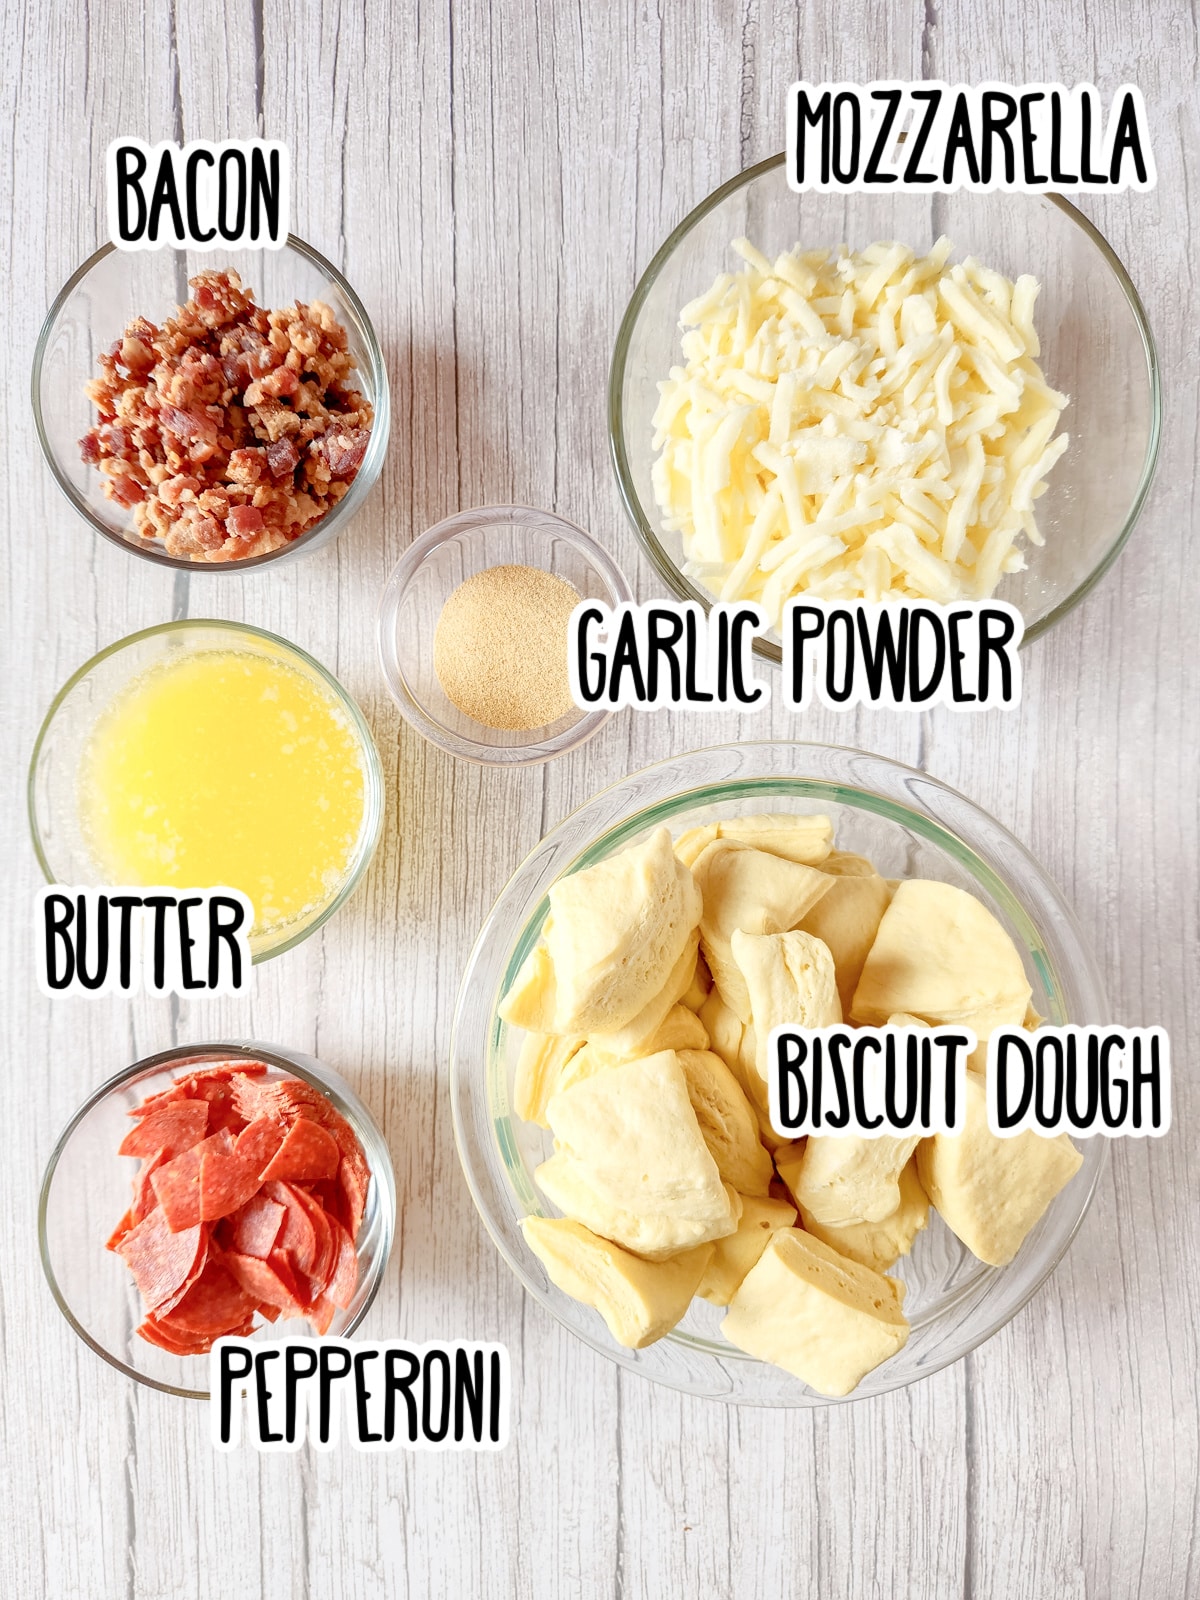 pizza pull apart bread ingredients